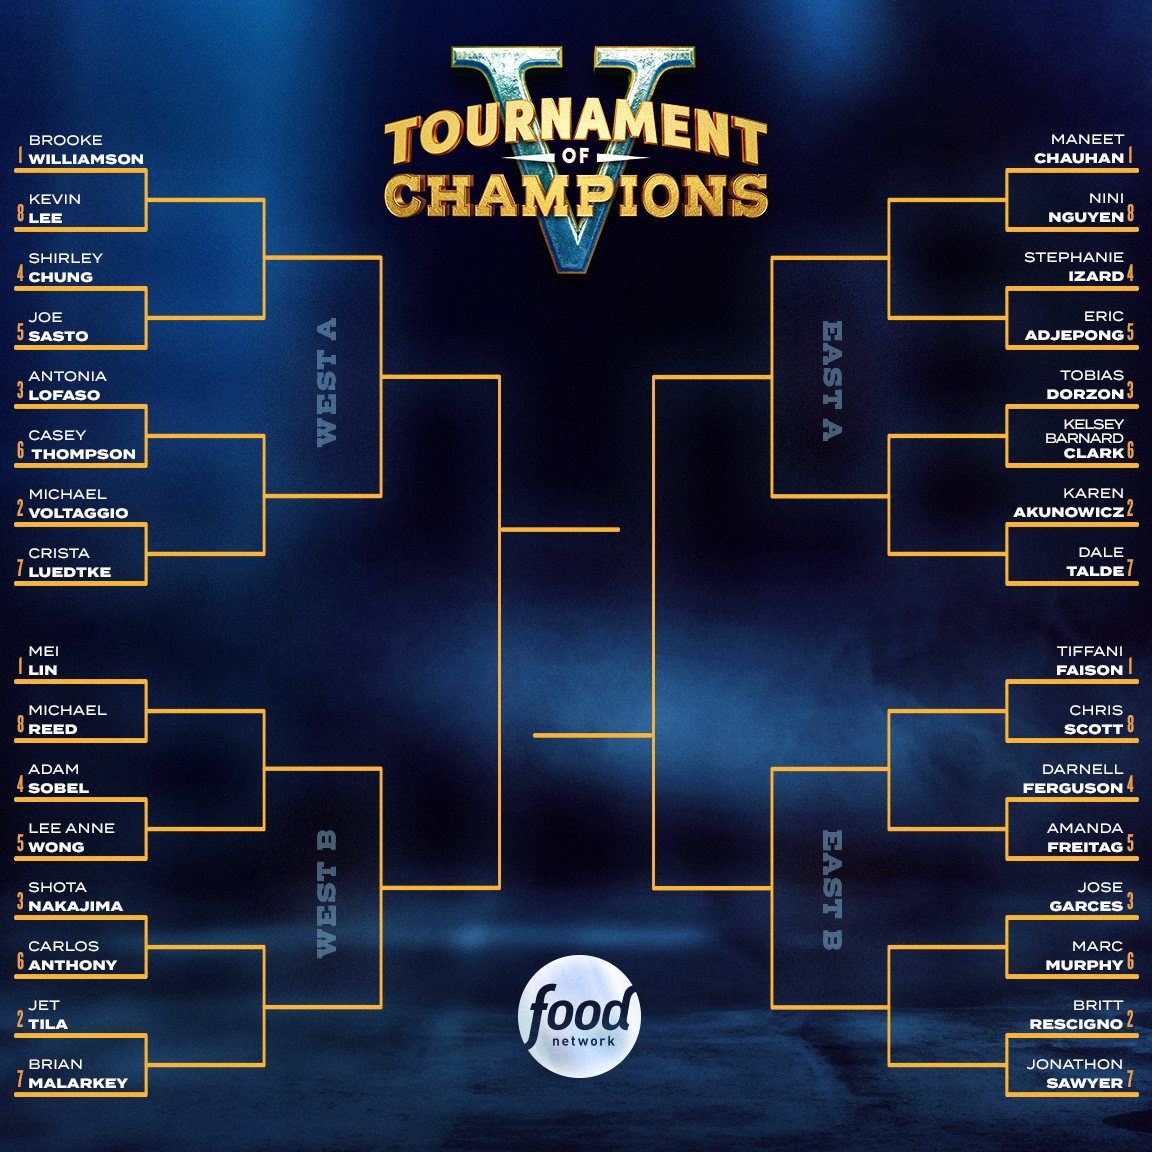 🔥 Build your official #TournamentOfChampions bracket now! 🔥 Head to FoodNetwork.com/TOCBracketChal… to make your picks and find out how you can enter for a chance to win weekly cash prizes! 🤑 Don't miss the season premiere with @GuyFieri on Sunday @ 8|7c!